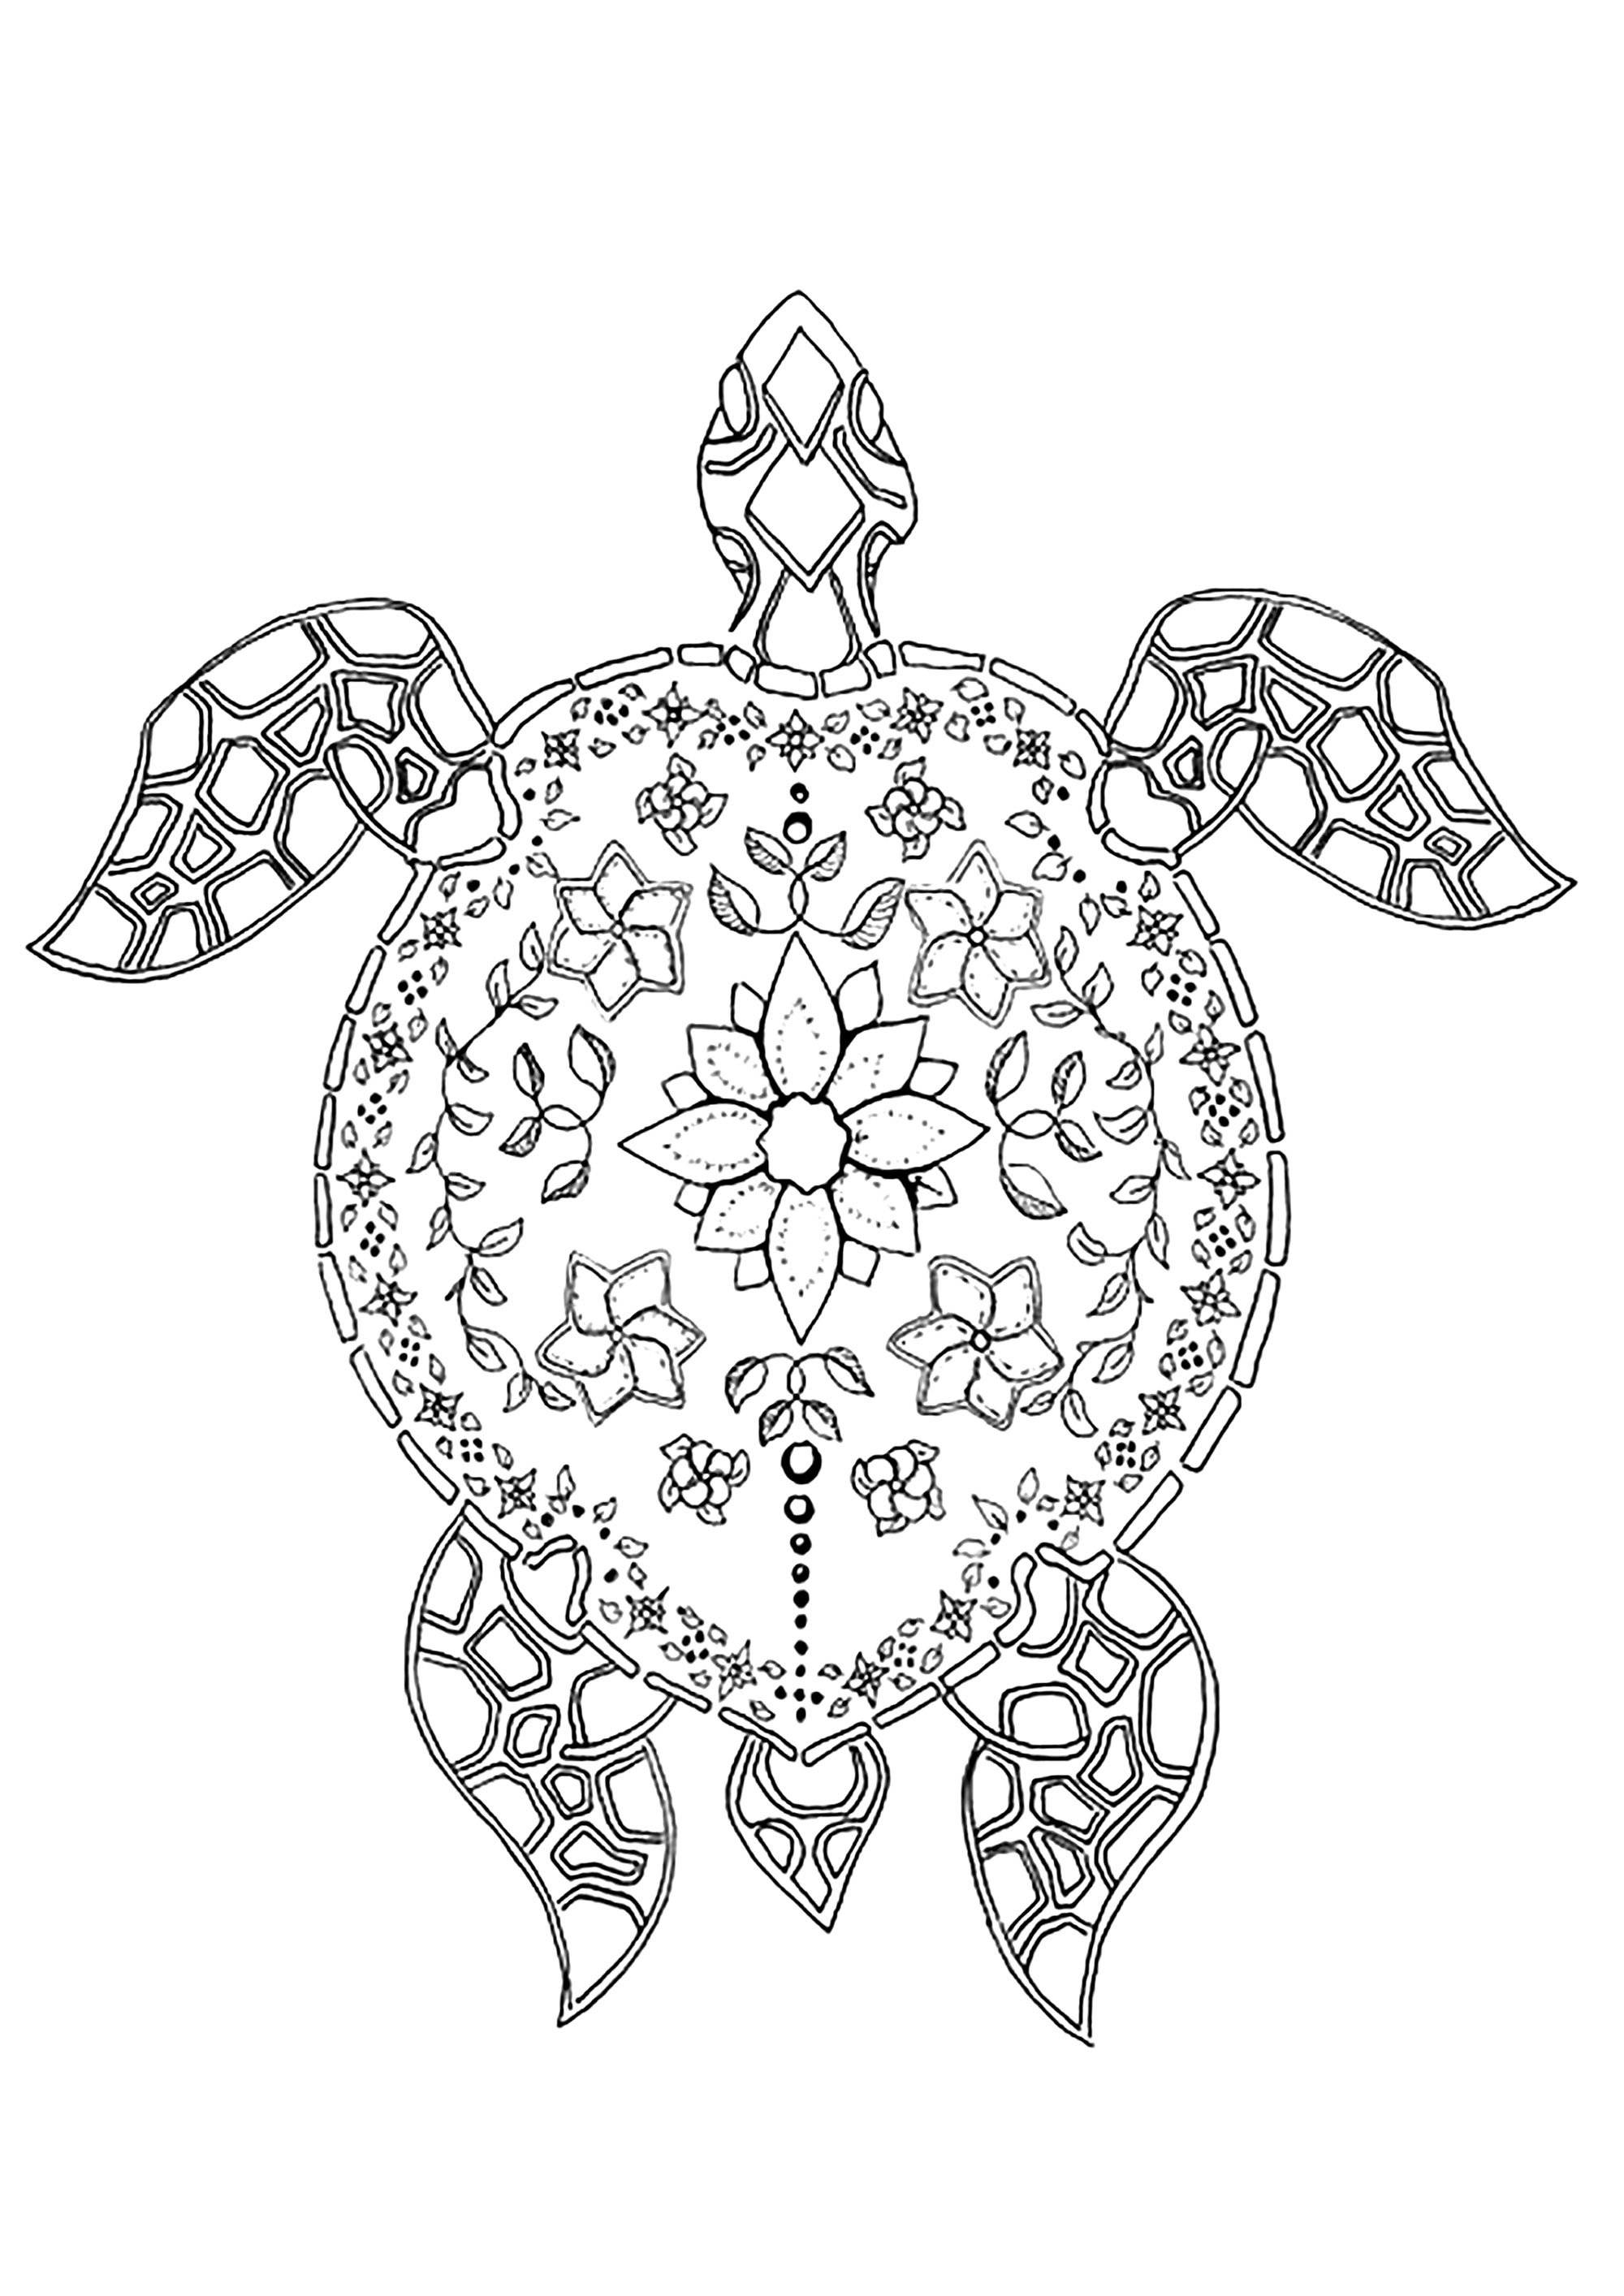 Coloring page : Turtles - 7